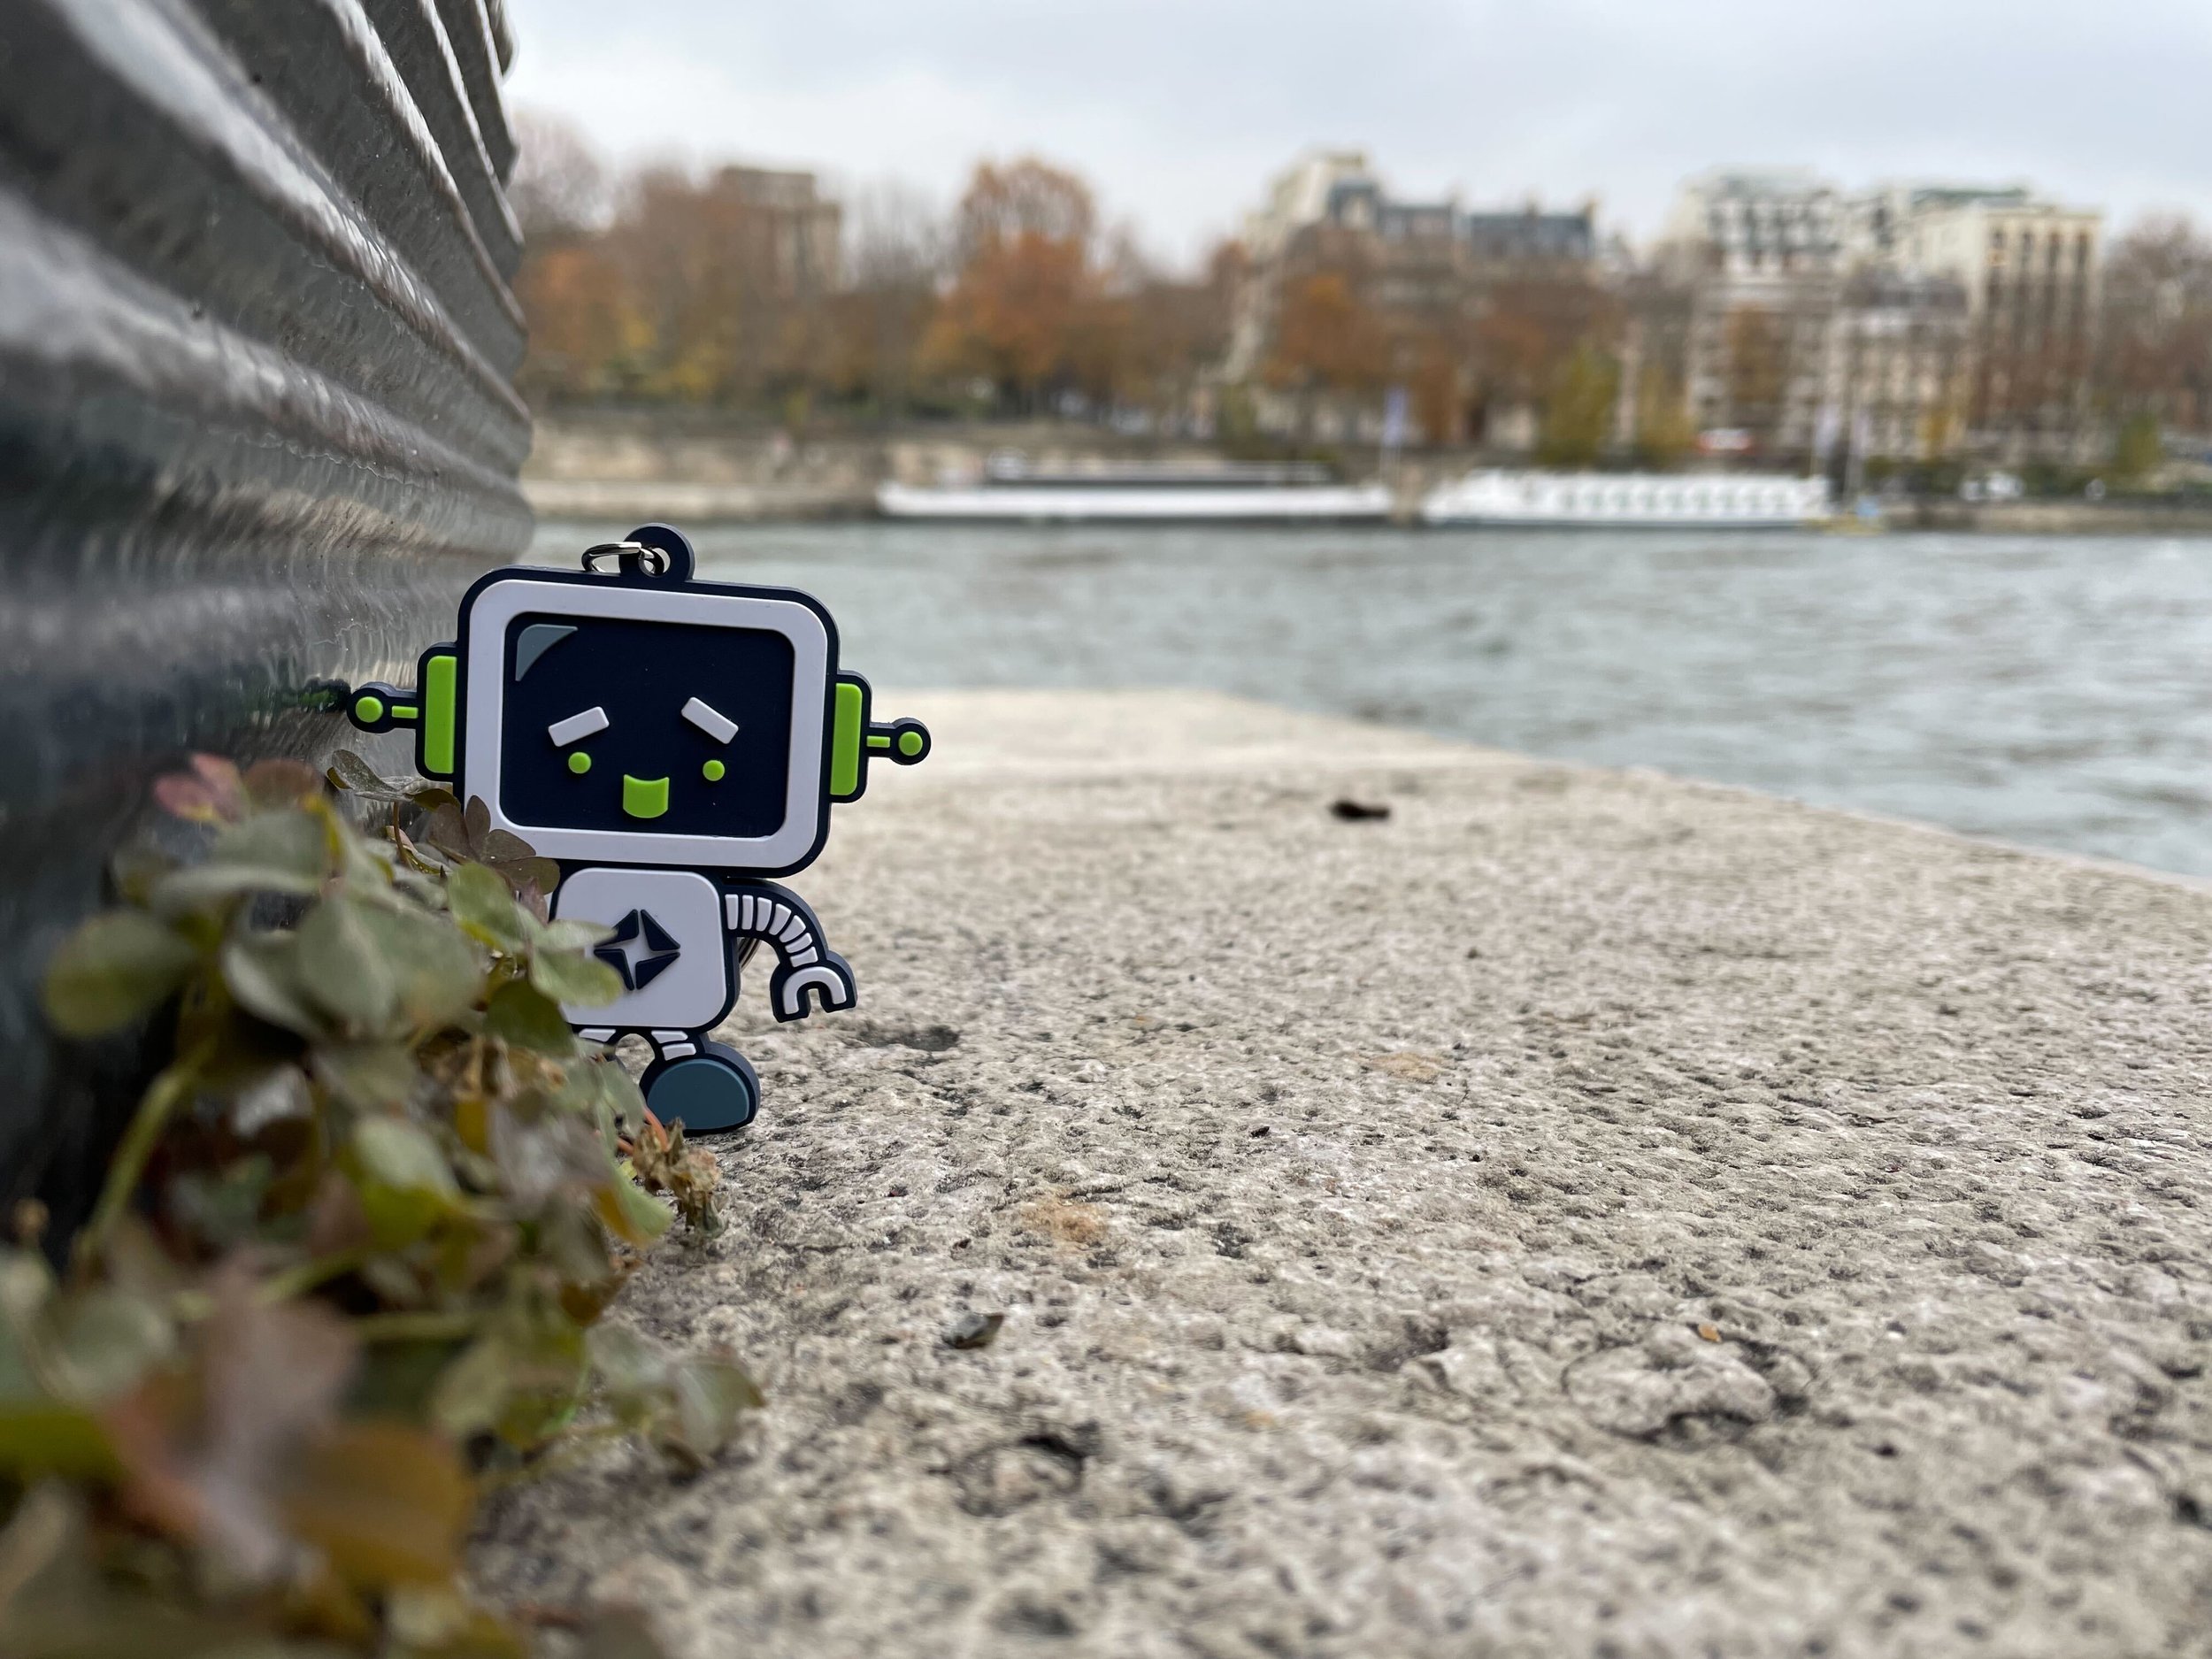 RoBert enjoying his time in Paris, finding relaxation watching the river boats.